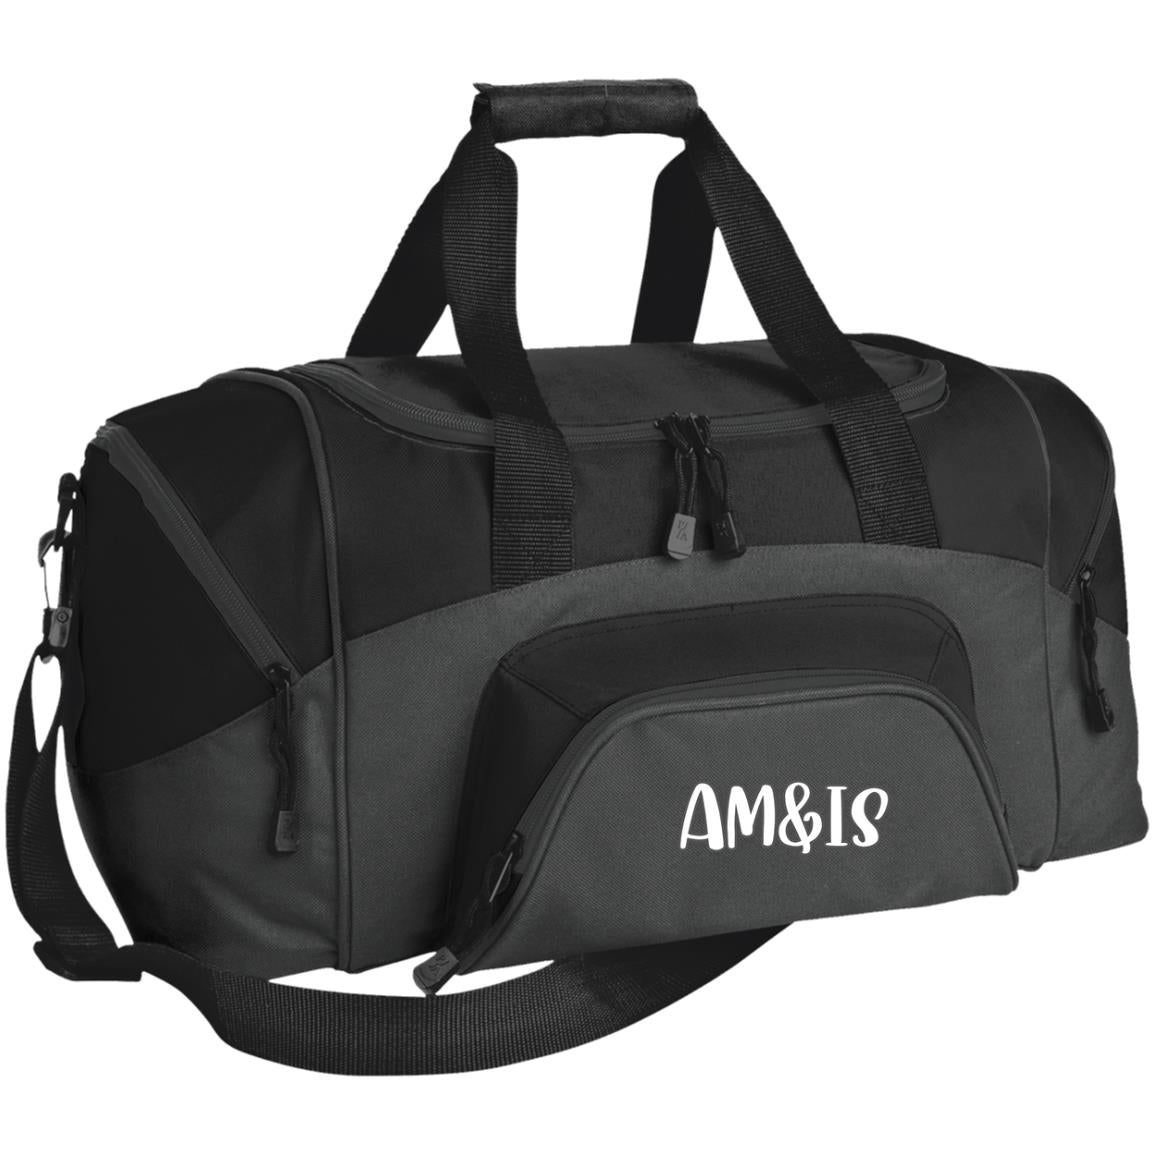 DARK CHARCOAL/BLACK ONE SIZE - AM&IS Activewear Small Colorblock Sport Duffel Bag - duffel bag at TFC&H Co.